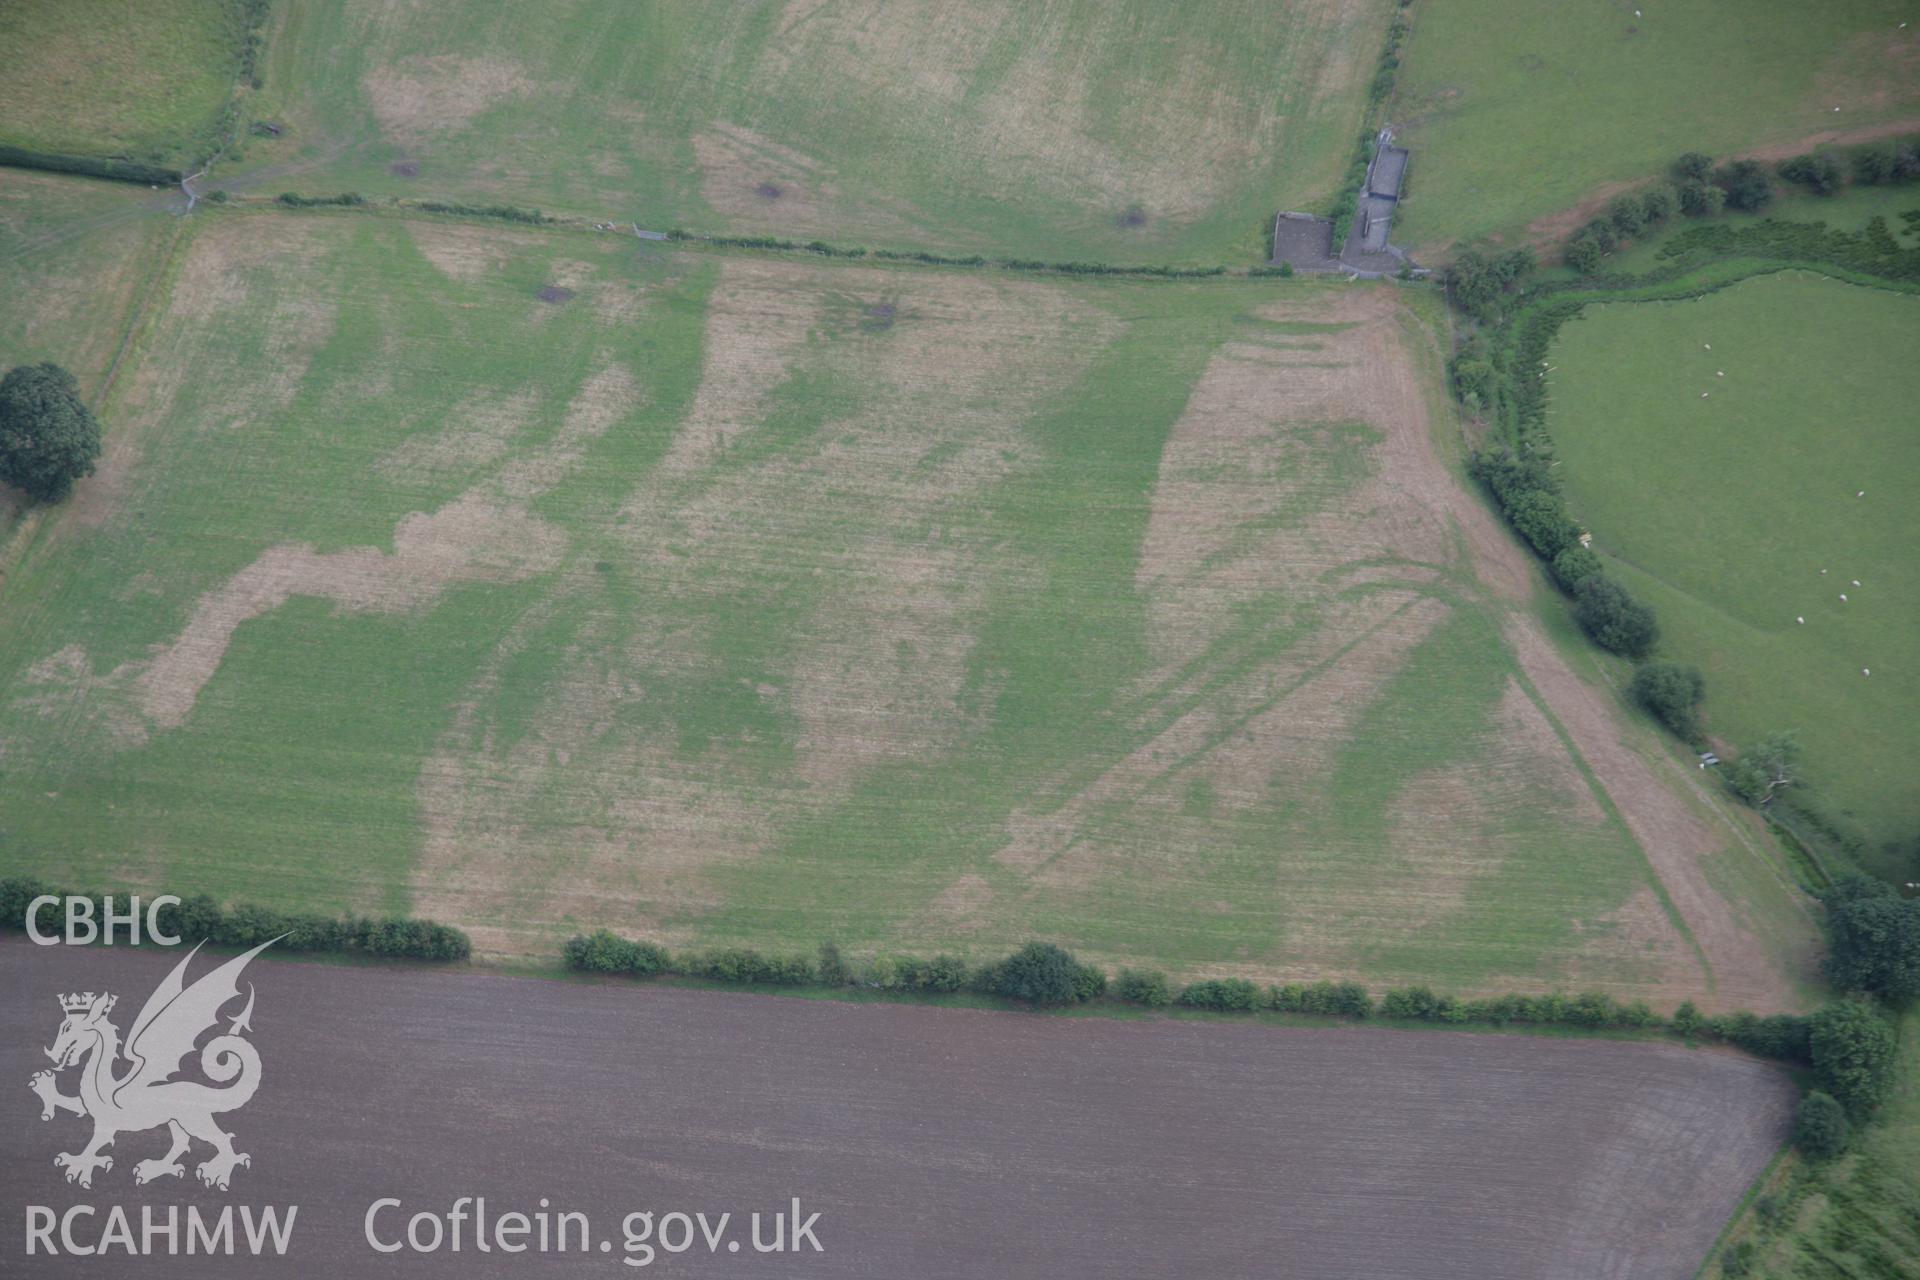 RCAHMW colour oblique aerial photograph of Llanfor Roman Military Complex visible in cropmarks, viewed from the north-west. Taken on 31 July 2006 by Toby Driver.